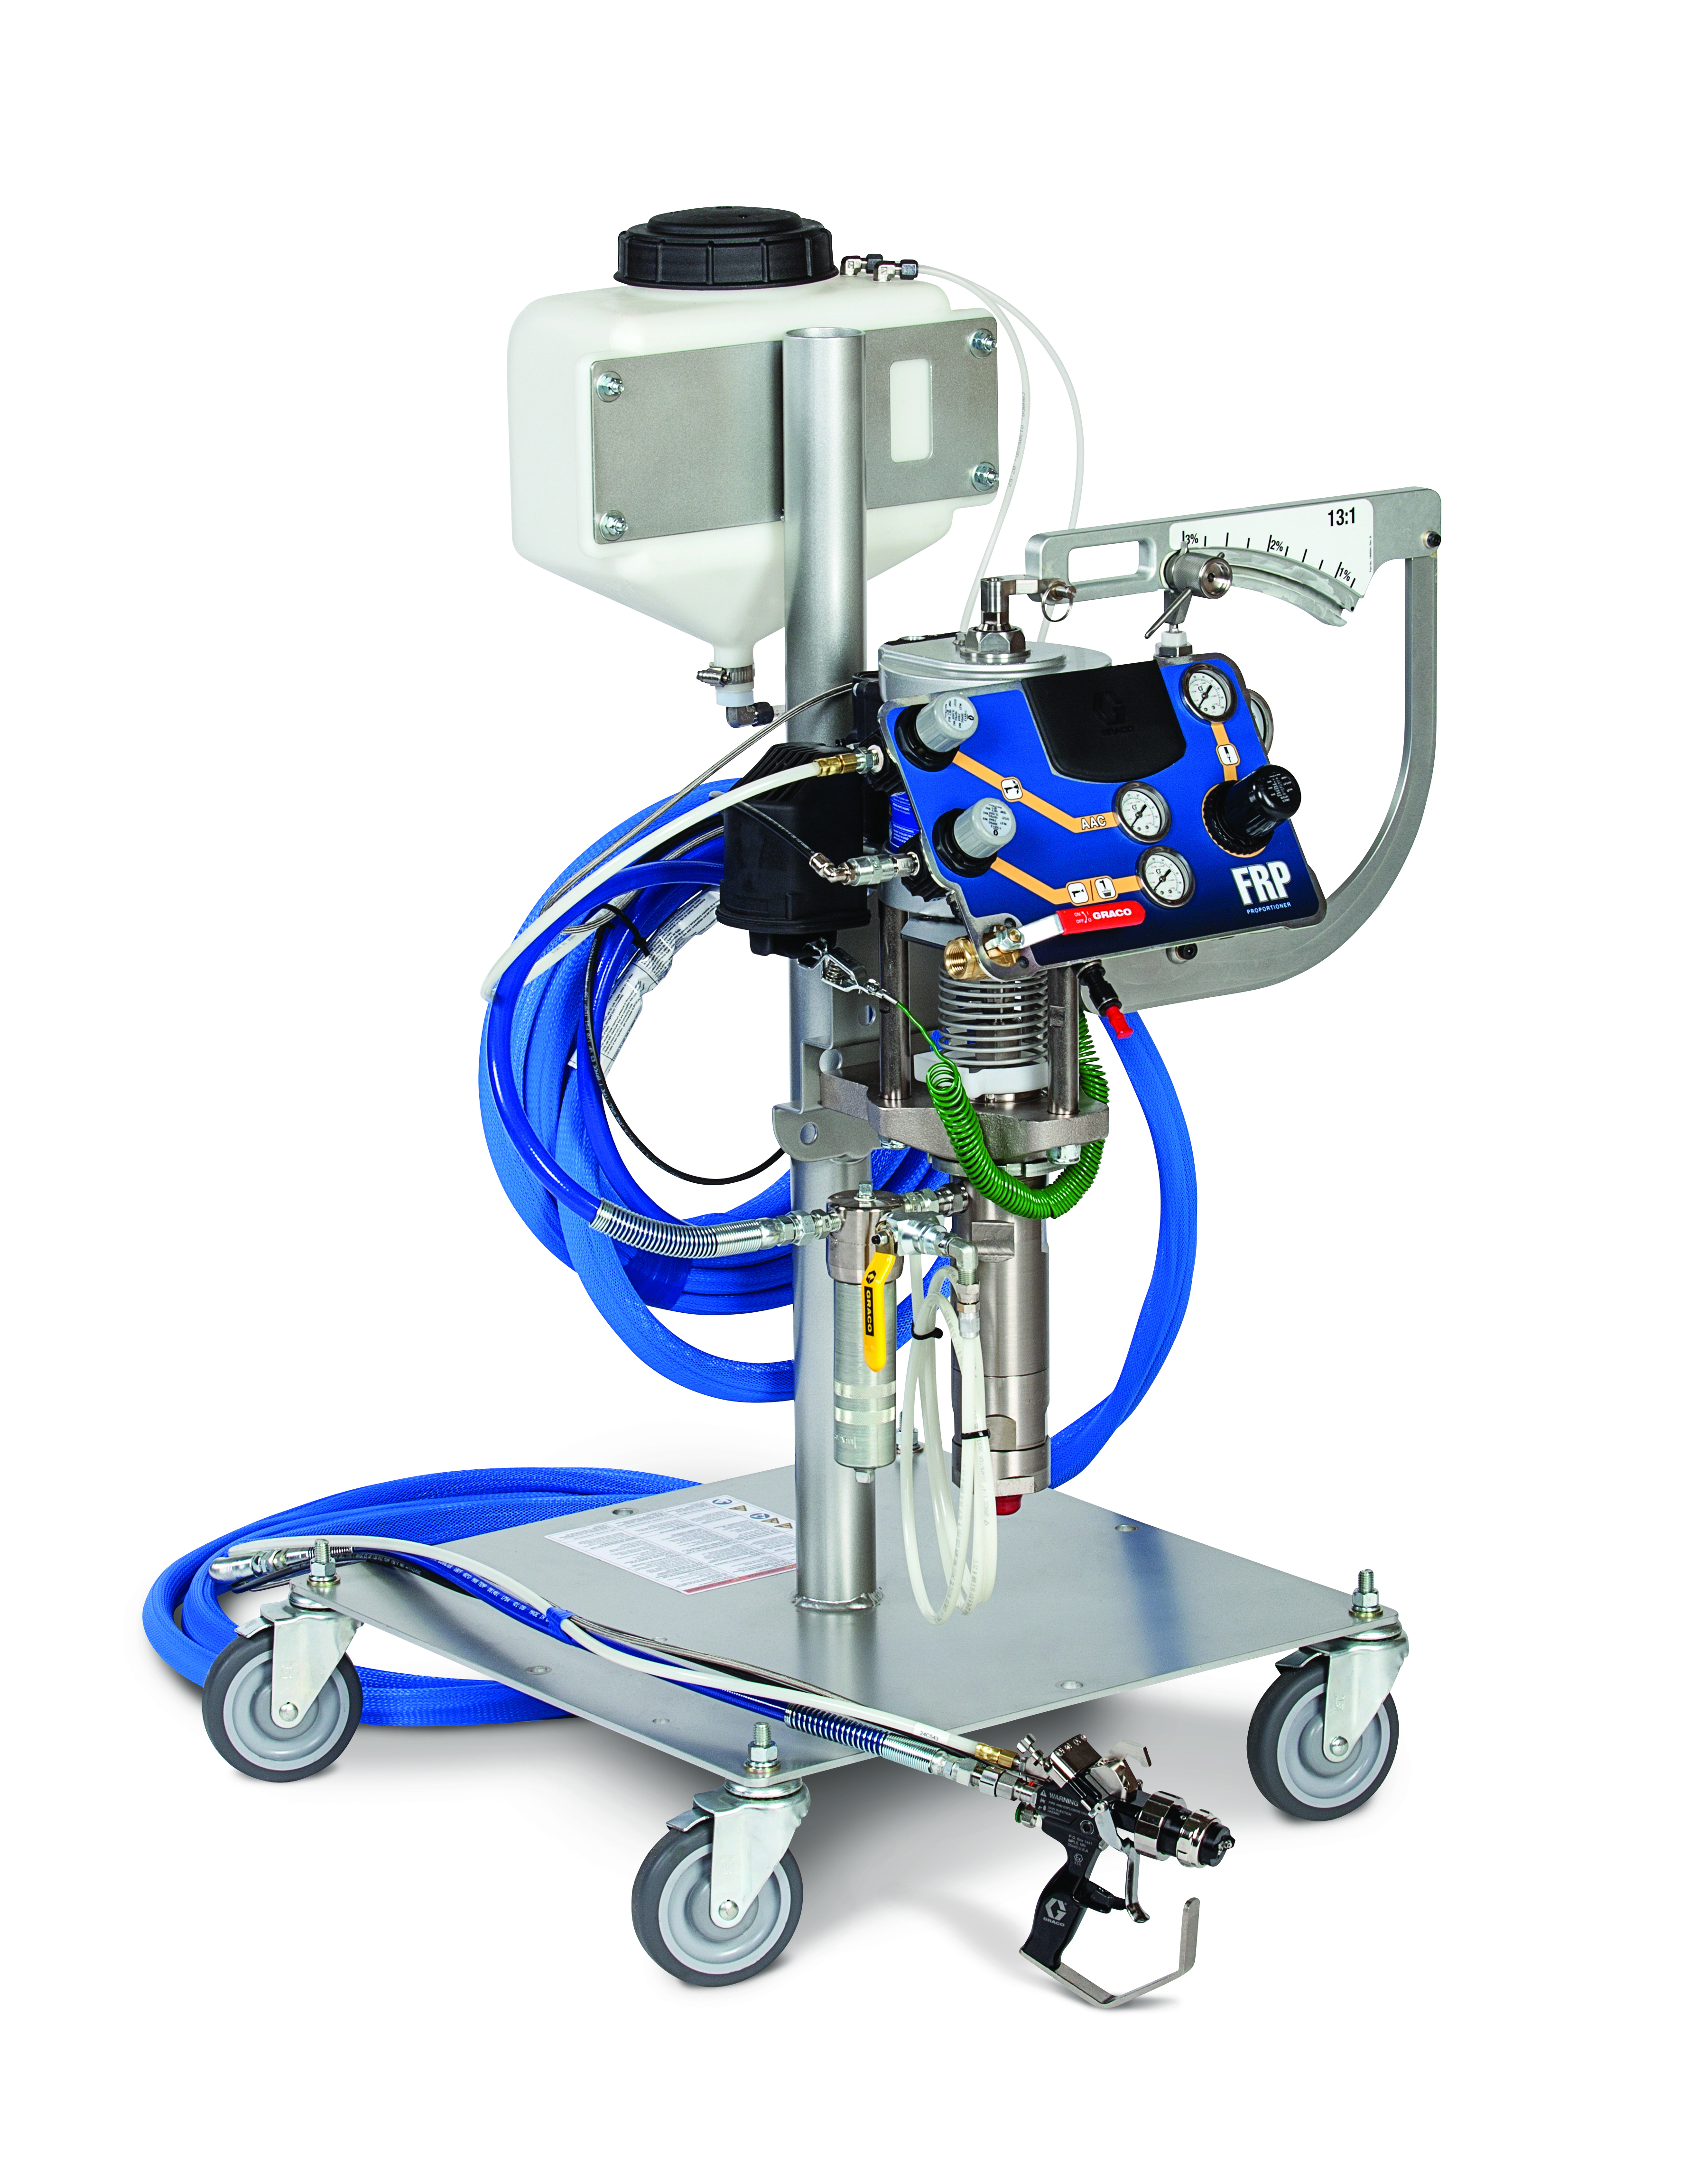 The Graco RS gel coat gun is reportedly up to 44% lighter than competing gun technologies.